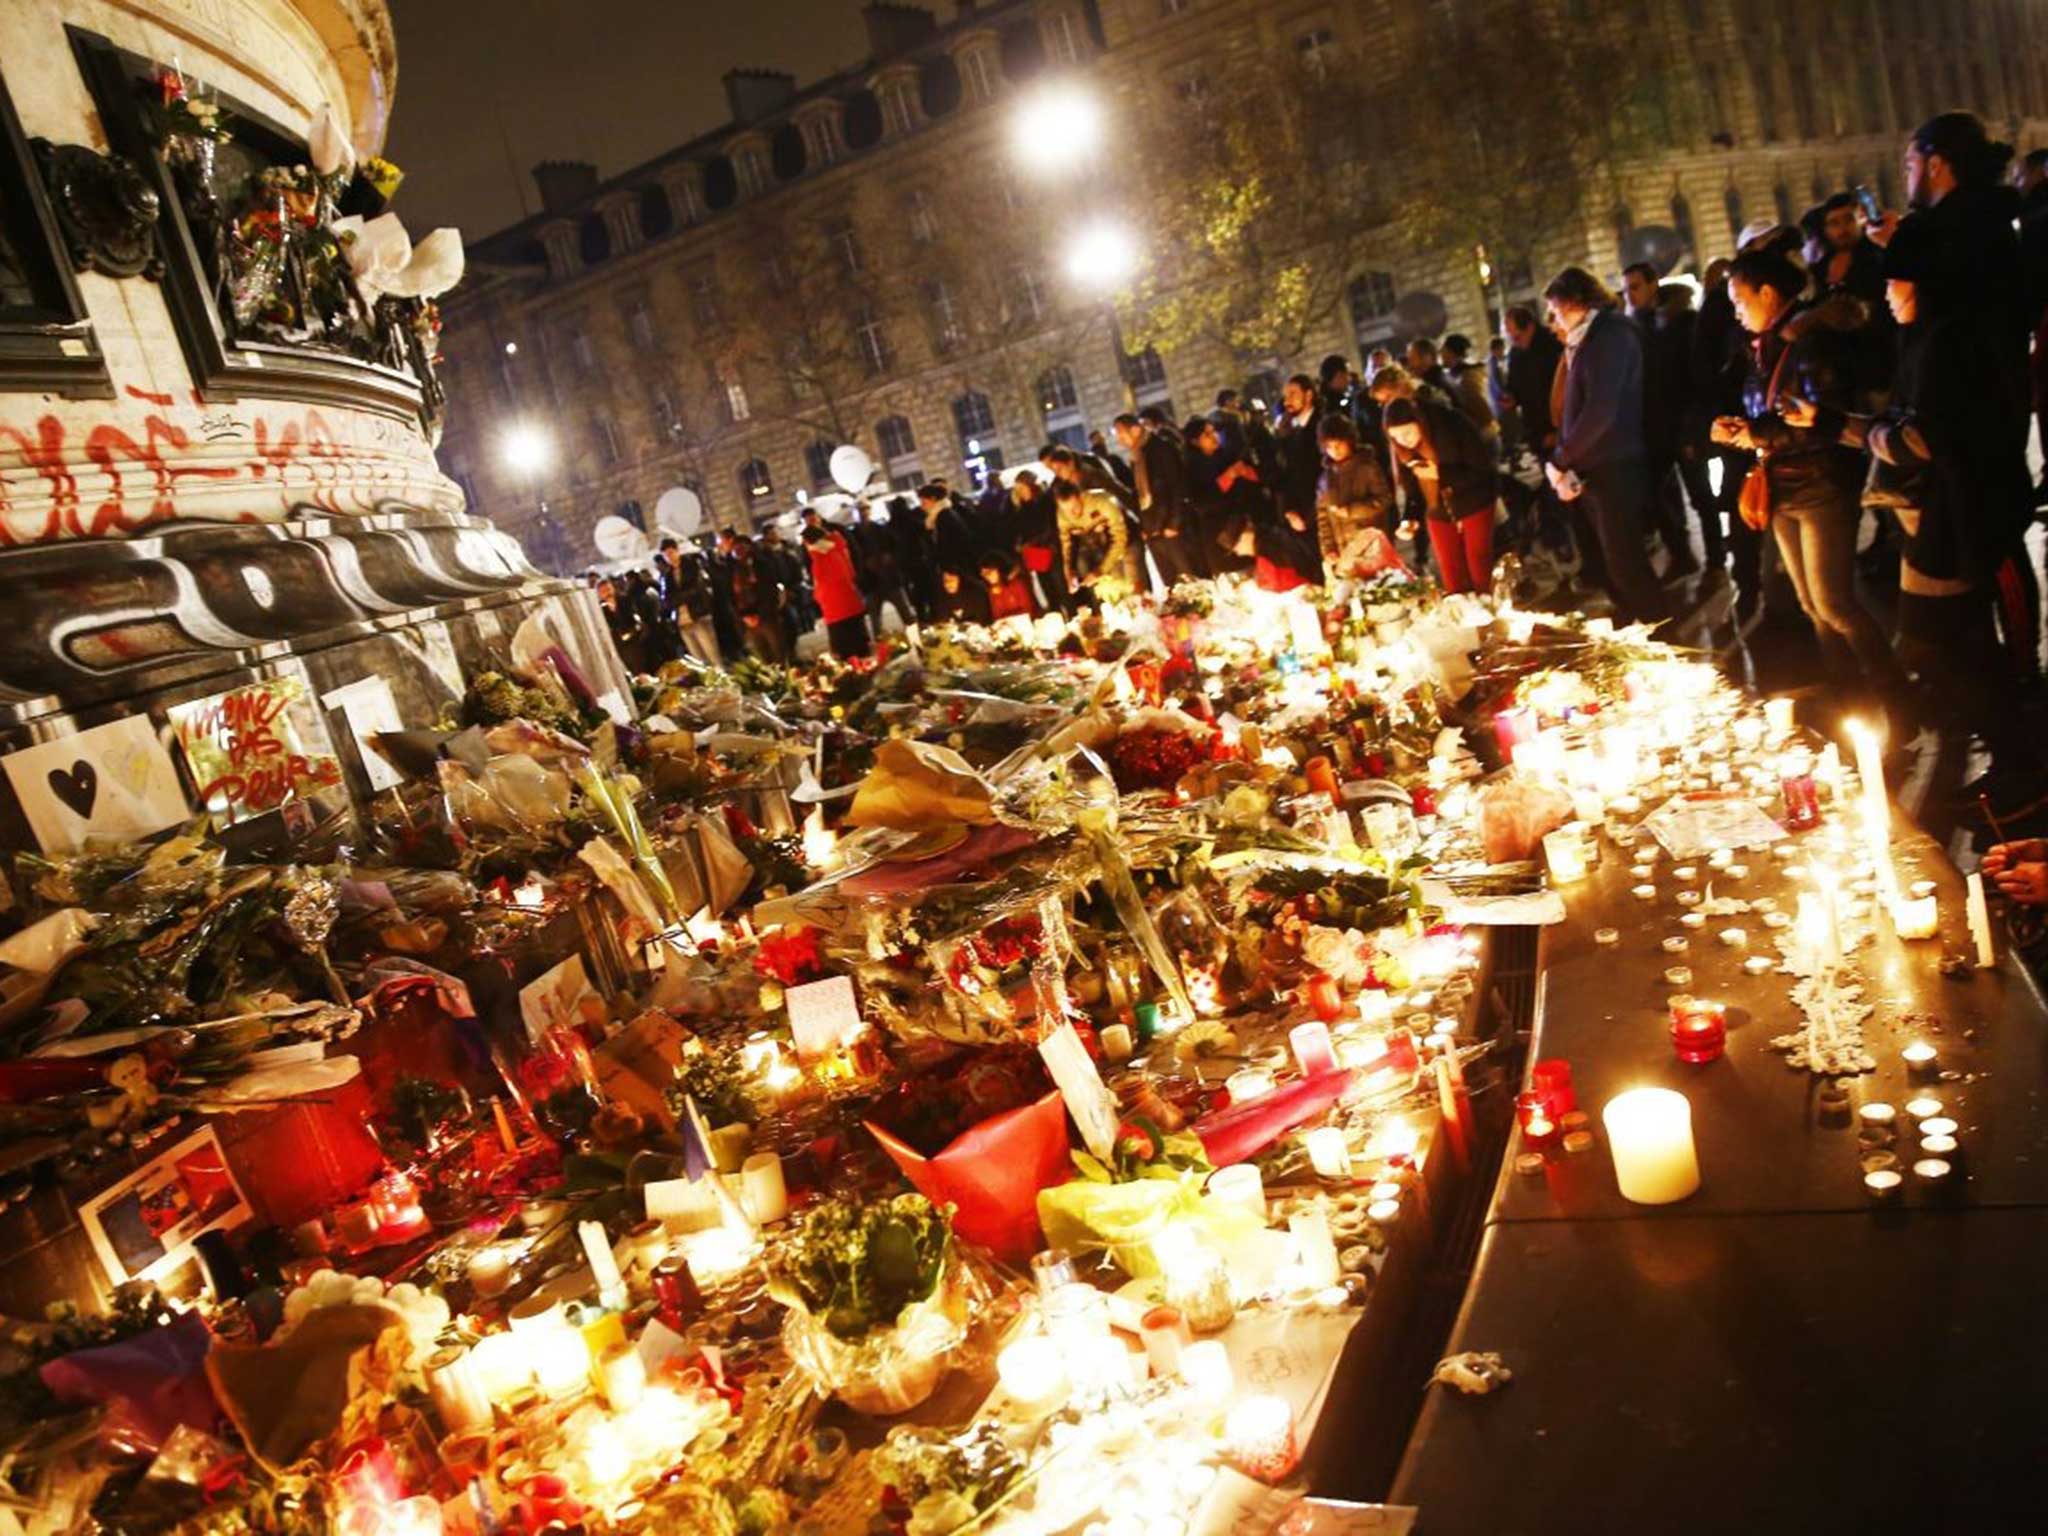 People honouring the victims at Place de la Republique with flowers and candles